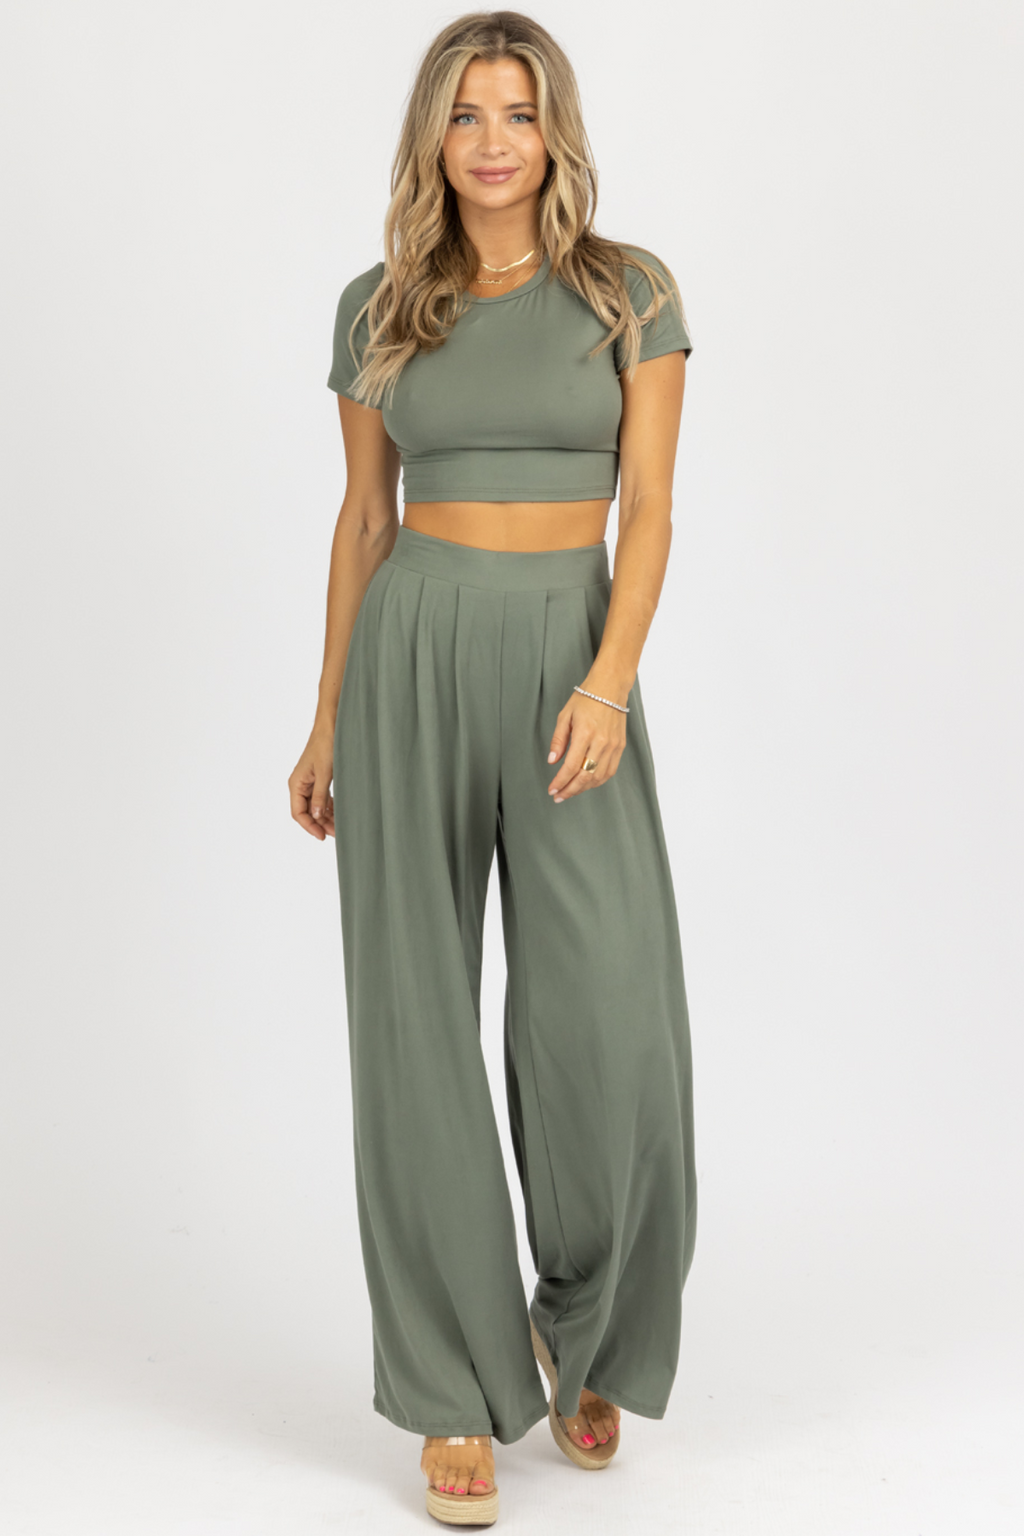 BUTTER SOFT OLIVE PALAZZO PANT SET *RESTOCK COMING SOON*